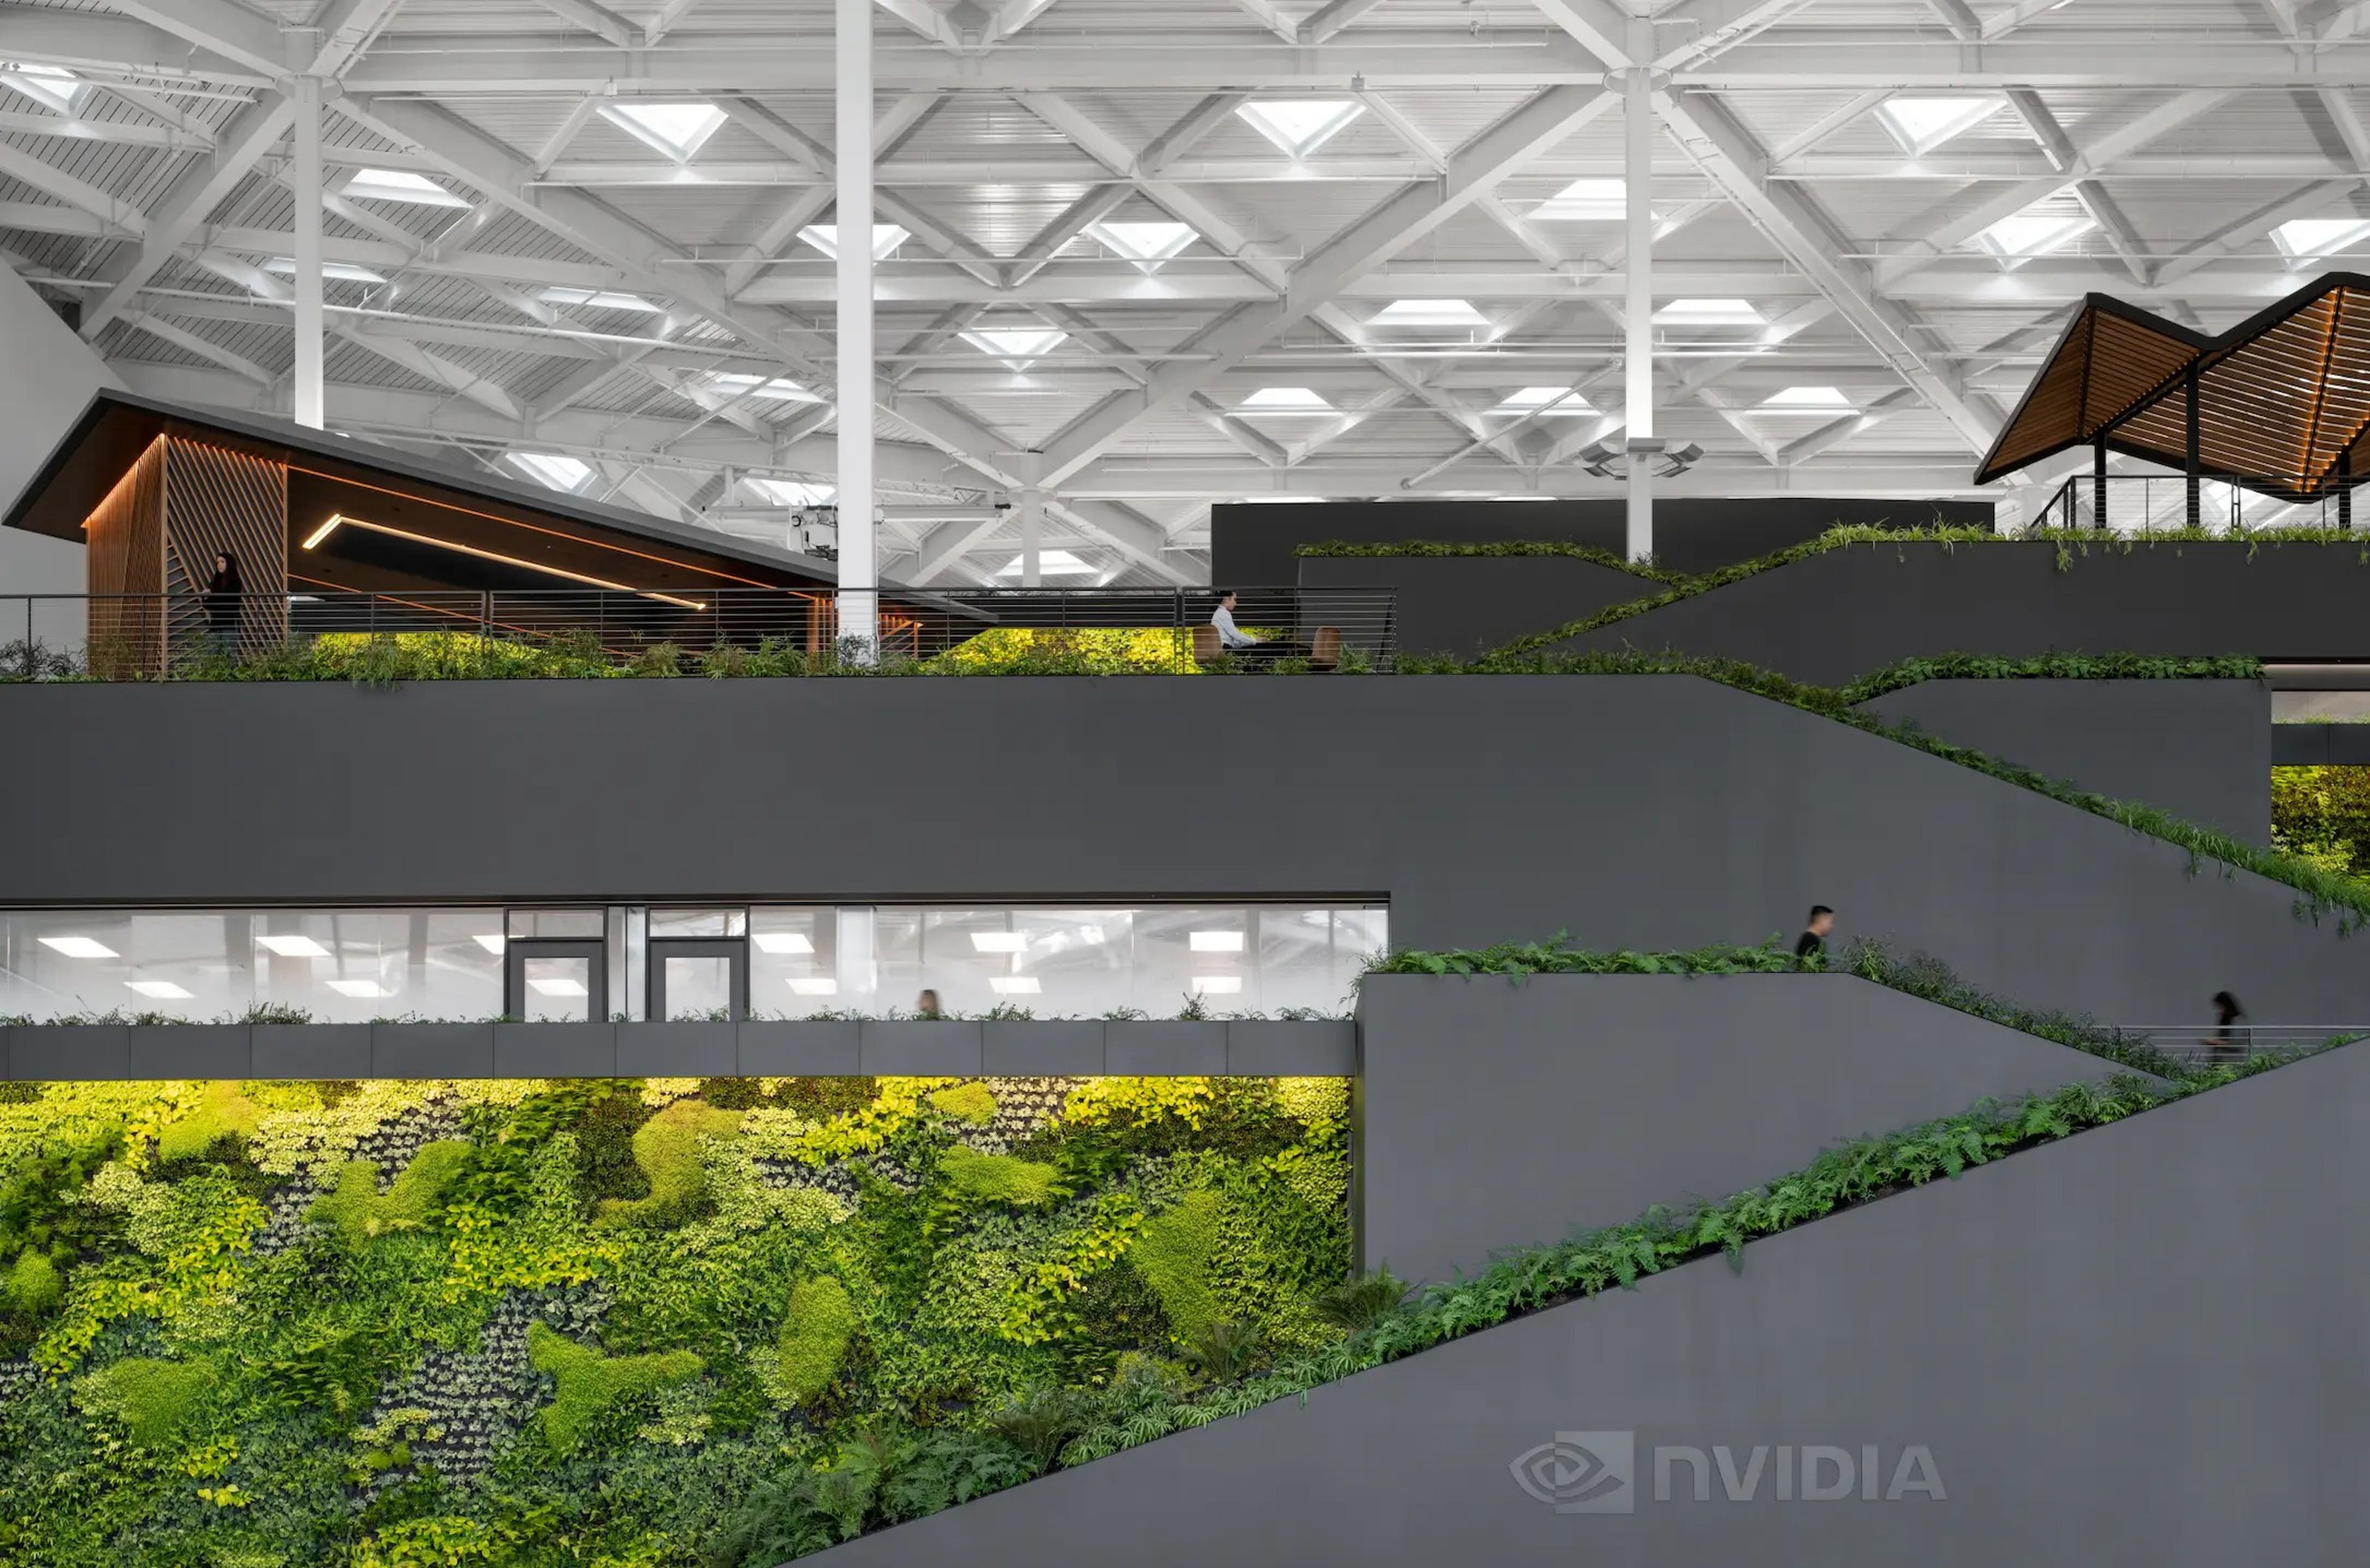 gray walkways inside Nvidia's headquarters, which are surrounded by a lot of greenery and triangle-shaped windows on the roof